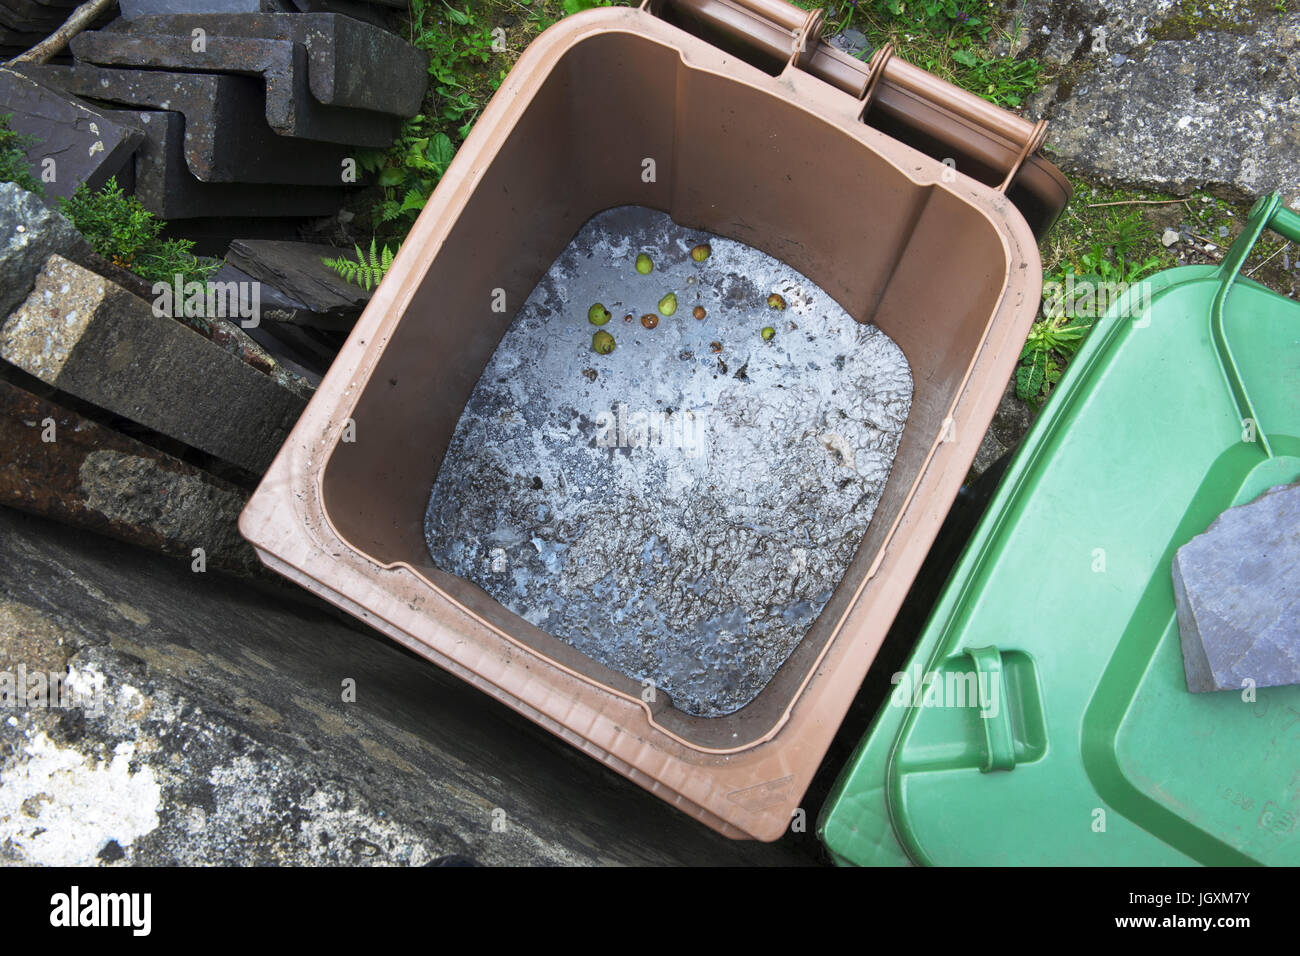 Disposing of perennial weeds by drowning in a green waste recycling bin. After three months the surface has covered over with a layer of mould. Stock Photo